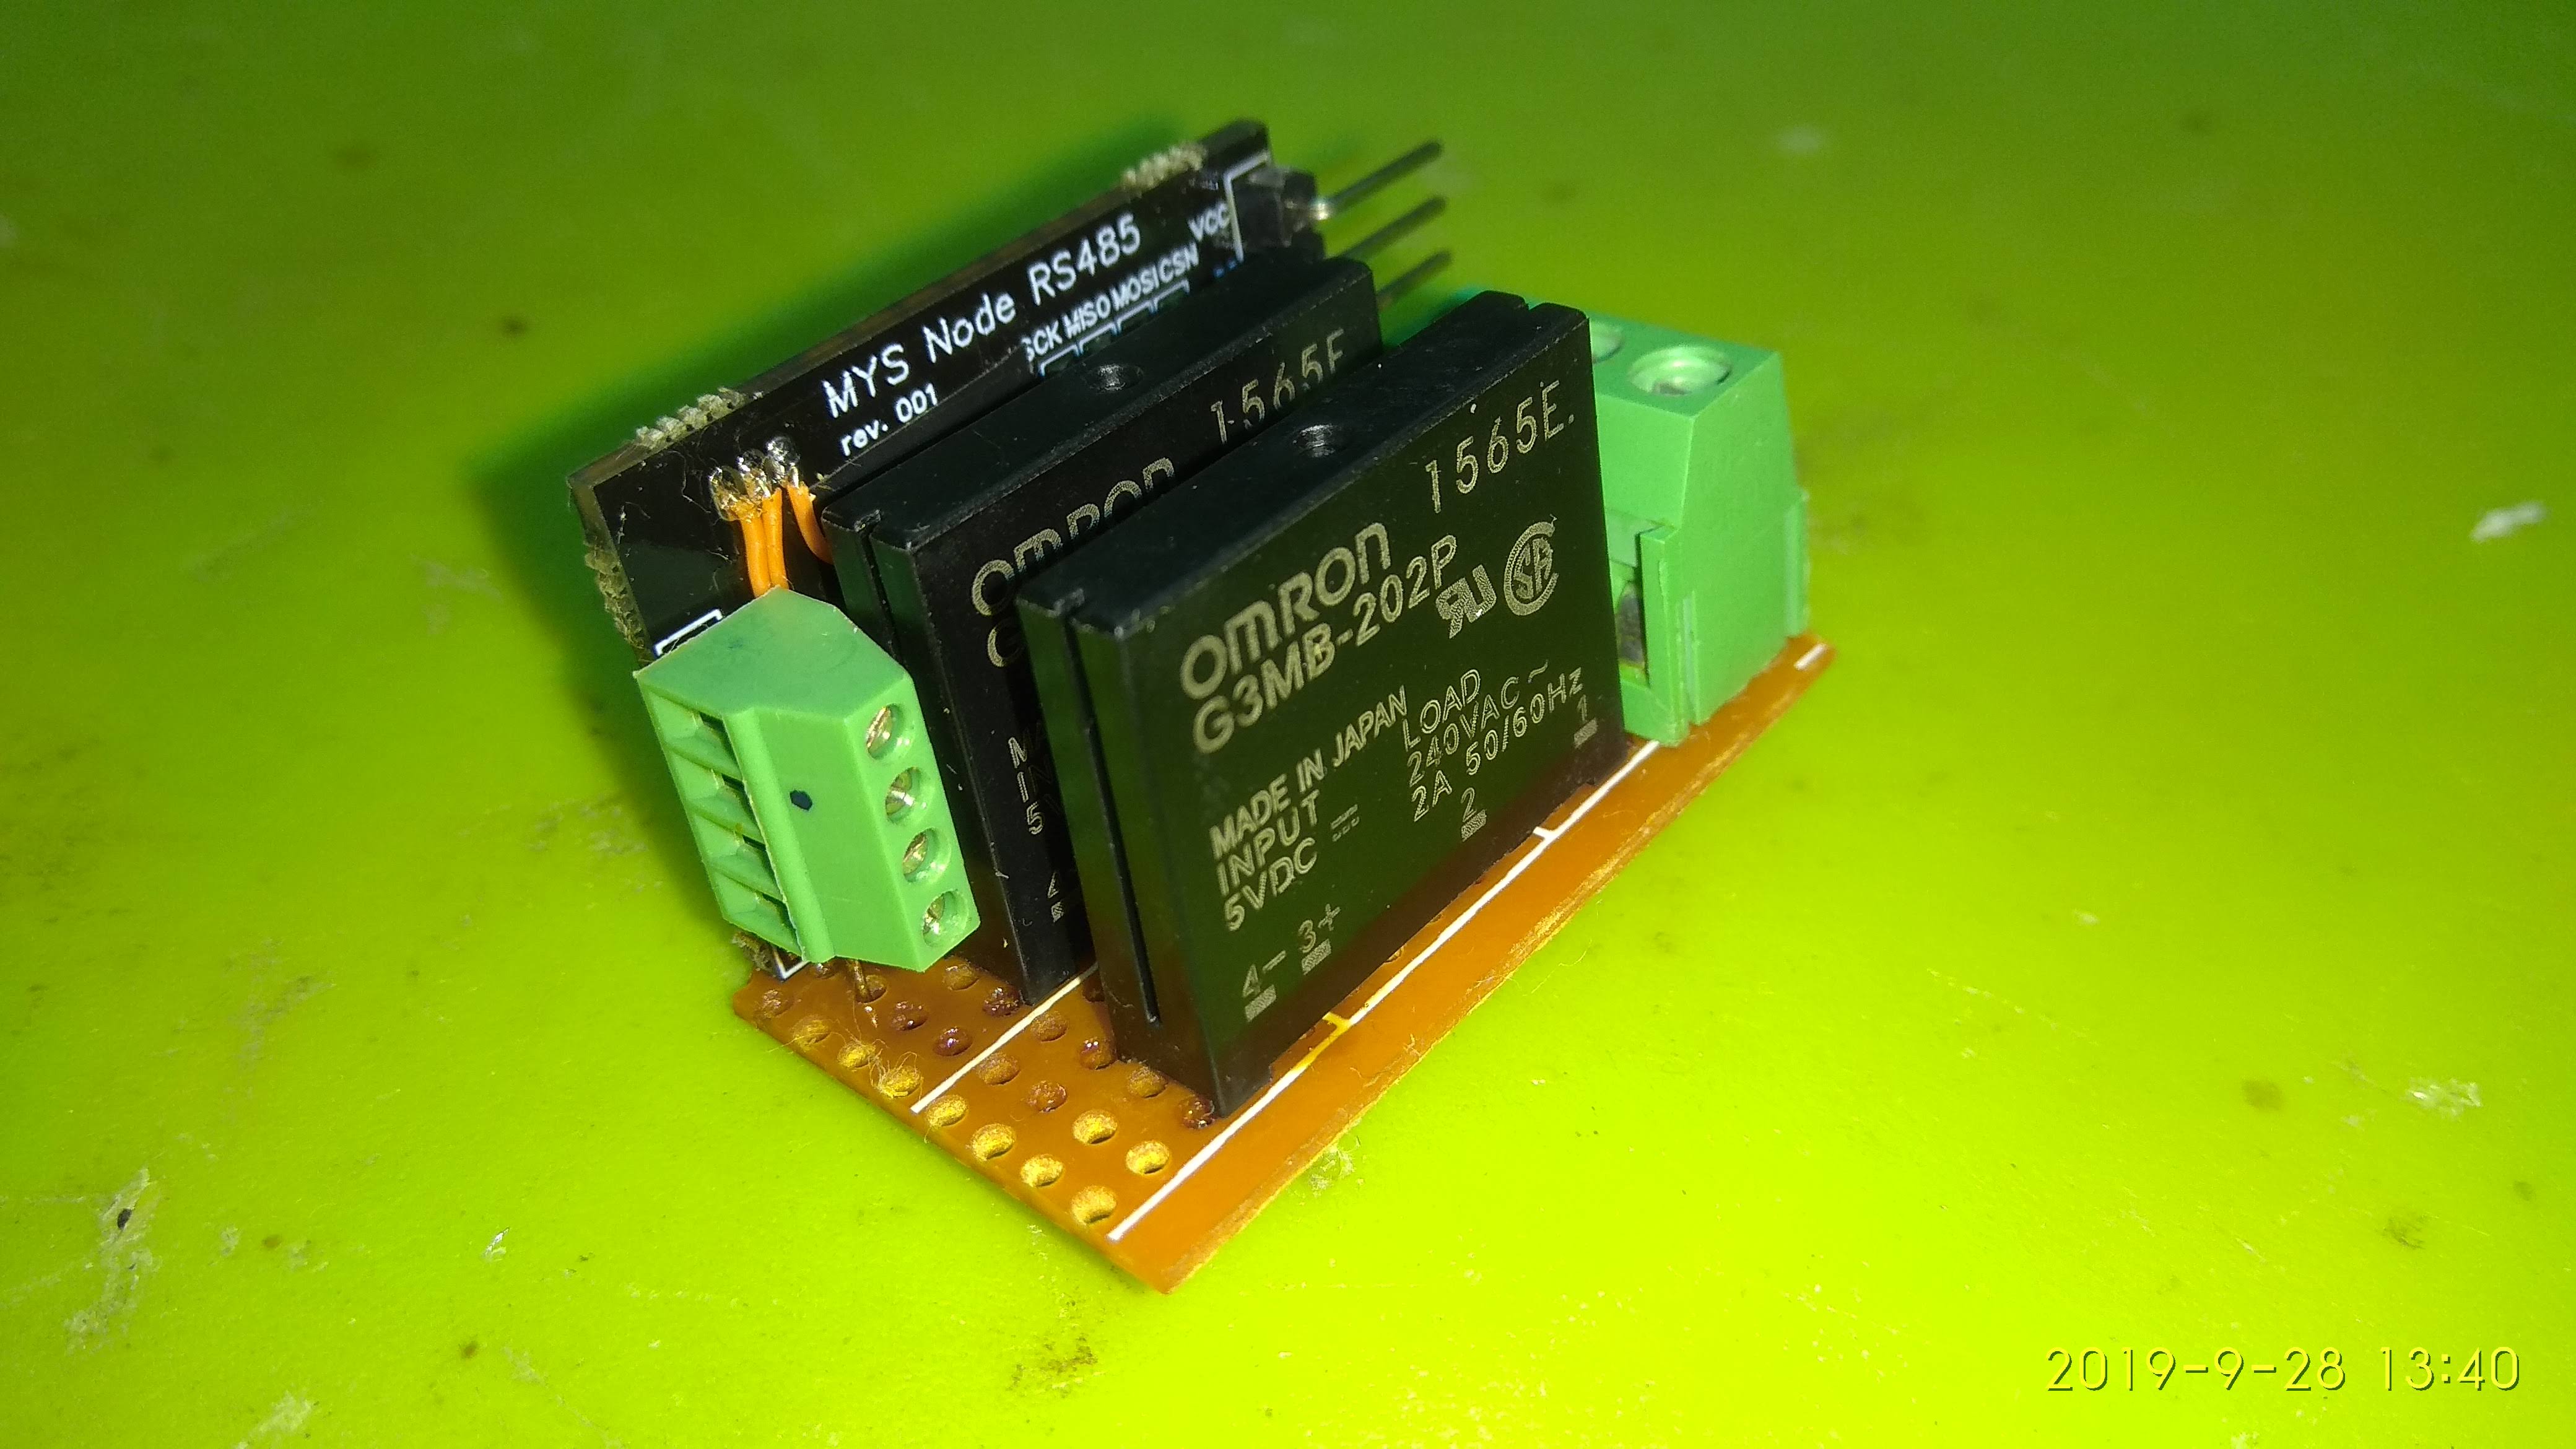 LIGHT module with RS485 node